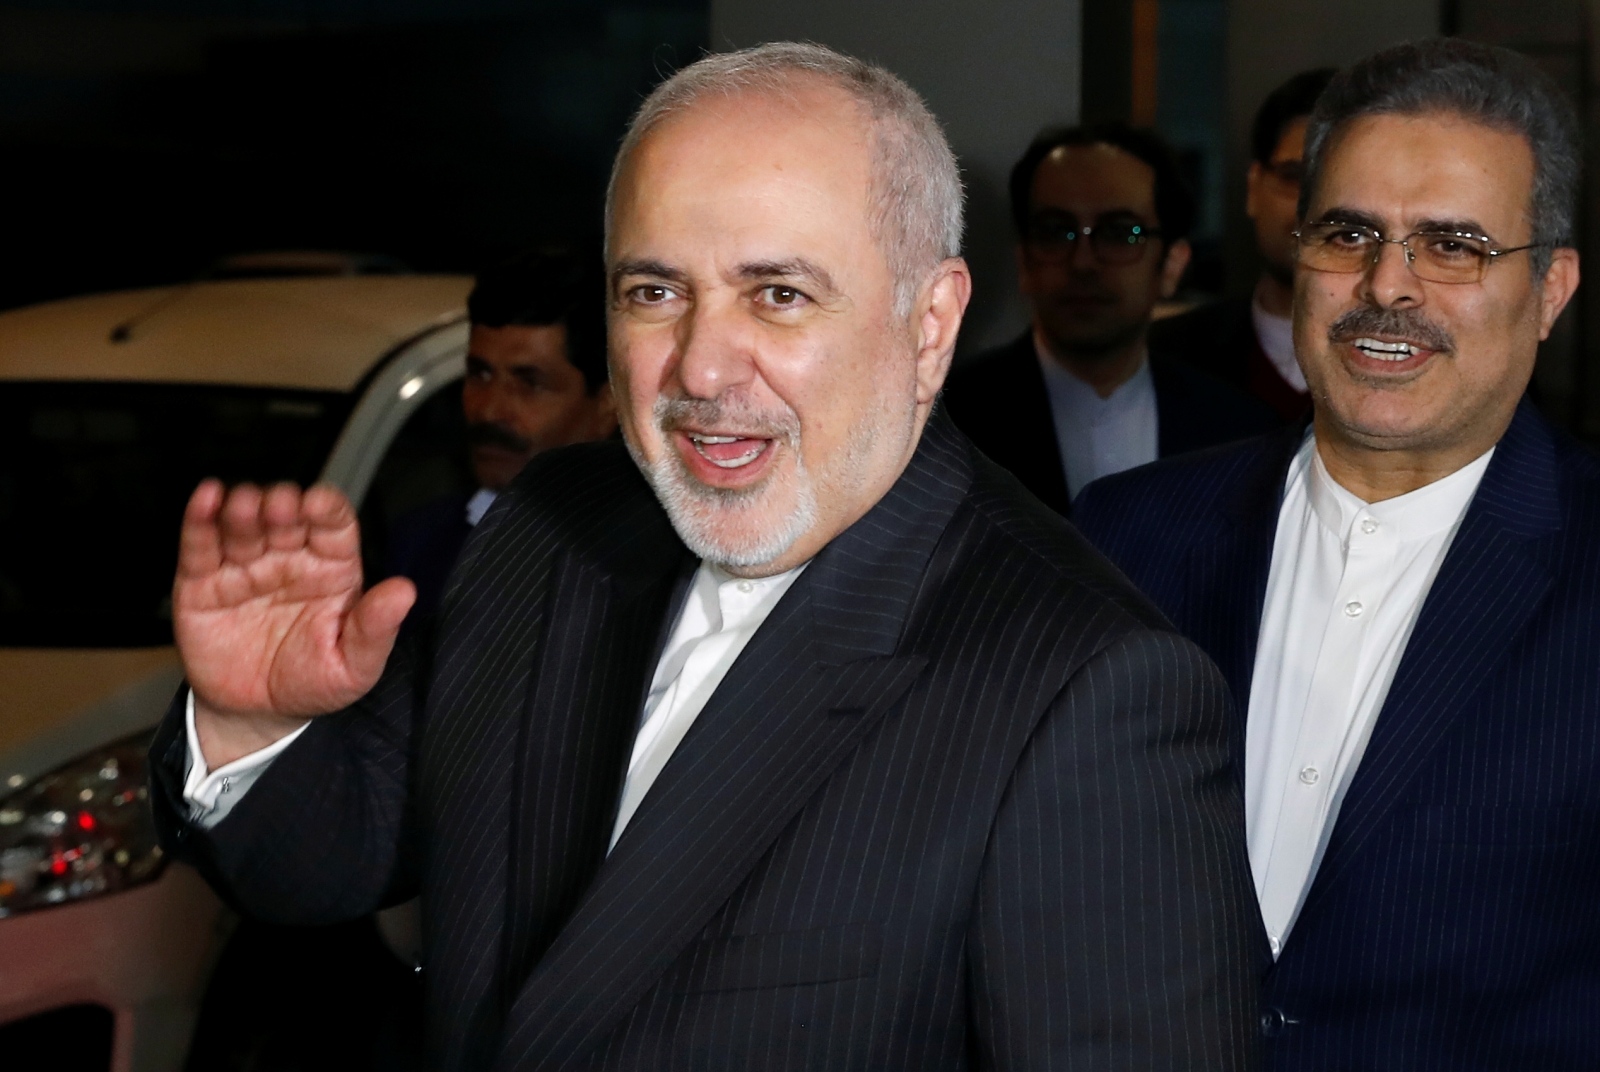 Iranian Foreign Minister Javad Zarif arrives in New Delhi Iranian Foreign Minister Javad Zarif gestures upon his arrival at the airport in New Delhi, India, January 14, 2020. REUTERS/Adnan Abidi ADNAN ABIDI